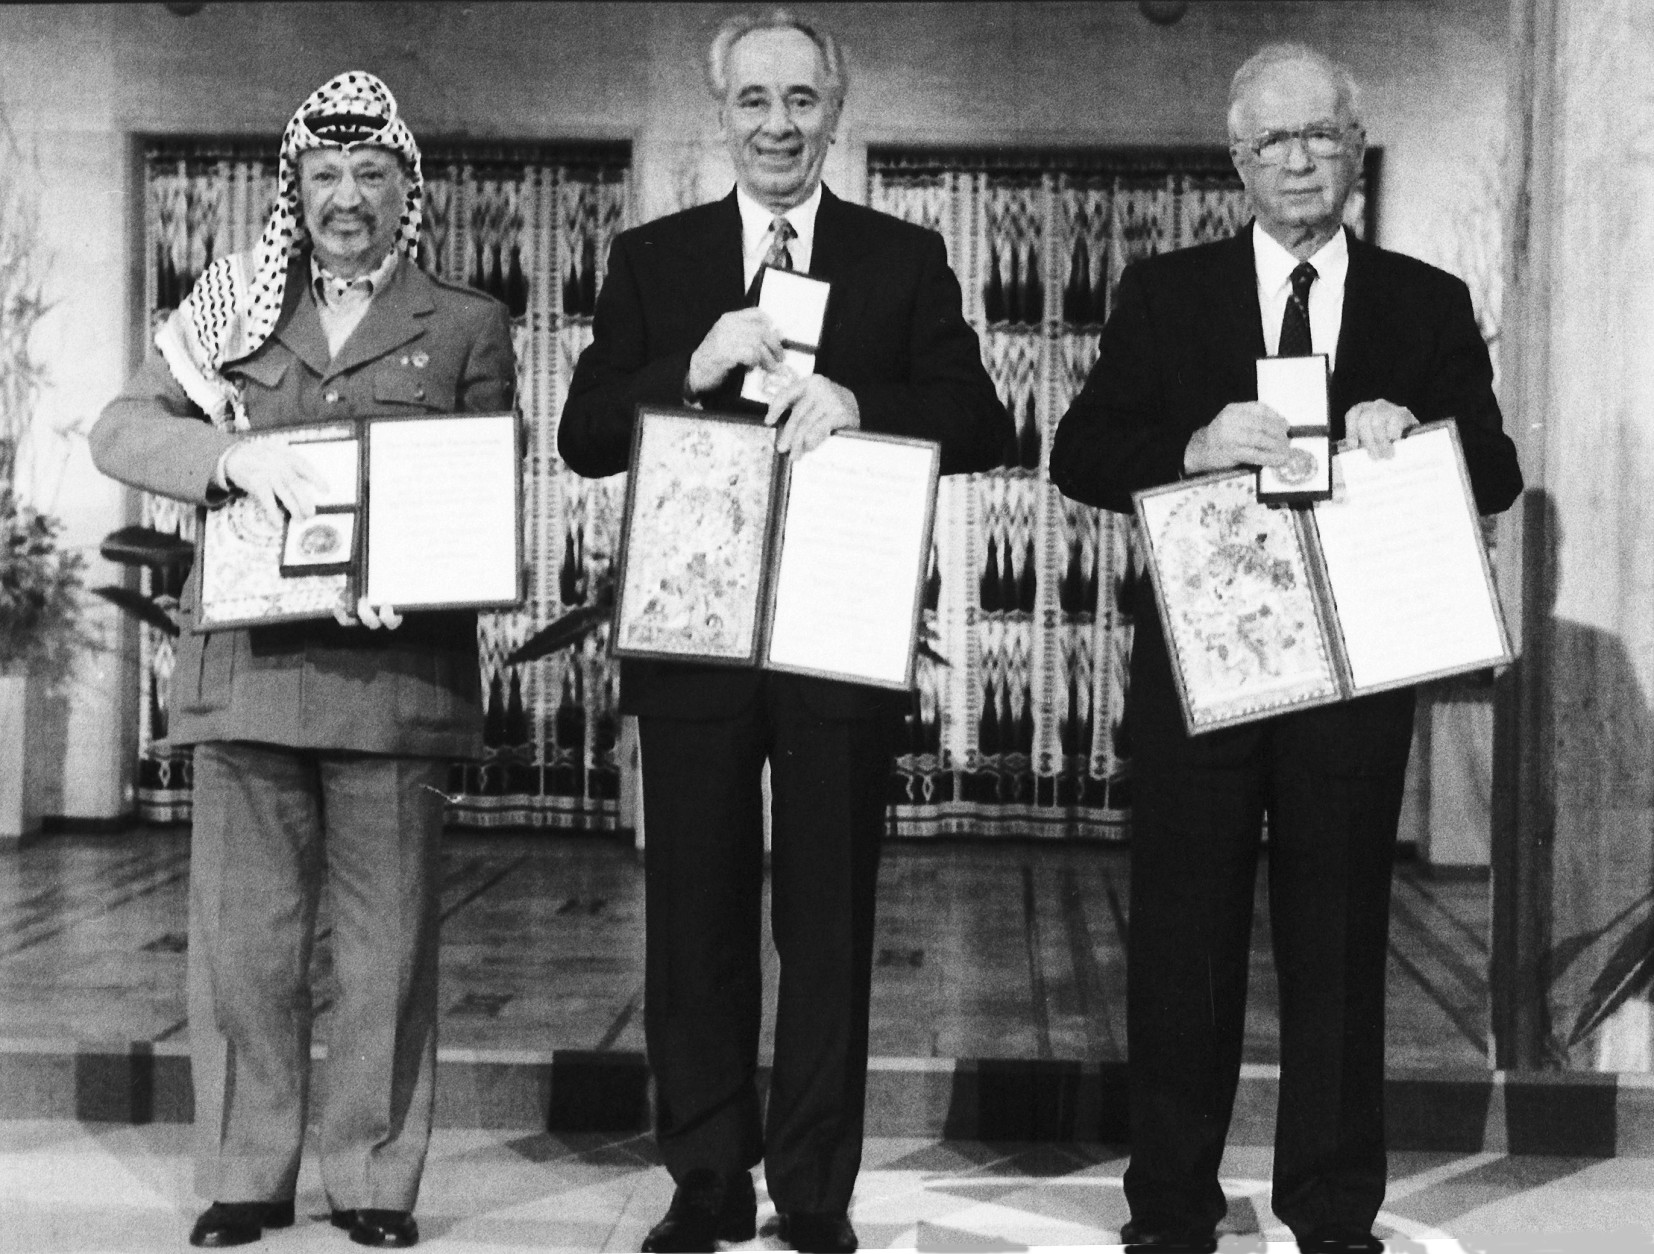 PLO leader Yasser Arafat, left, Israeli Prime Minister Yitzhak Rabin, centre, and Israeli Foreign Minister Shimon Peres pose with their medals and diplomas, after receiving the 1994 Nobel Peace Prize in Oslo's City Hall, Dec. 10, 1994. The three men received the prize for their efforts towards peace in the Middle East. (AP Photo)